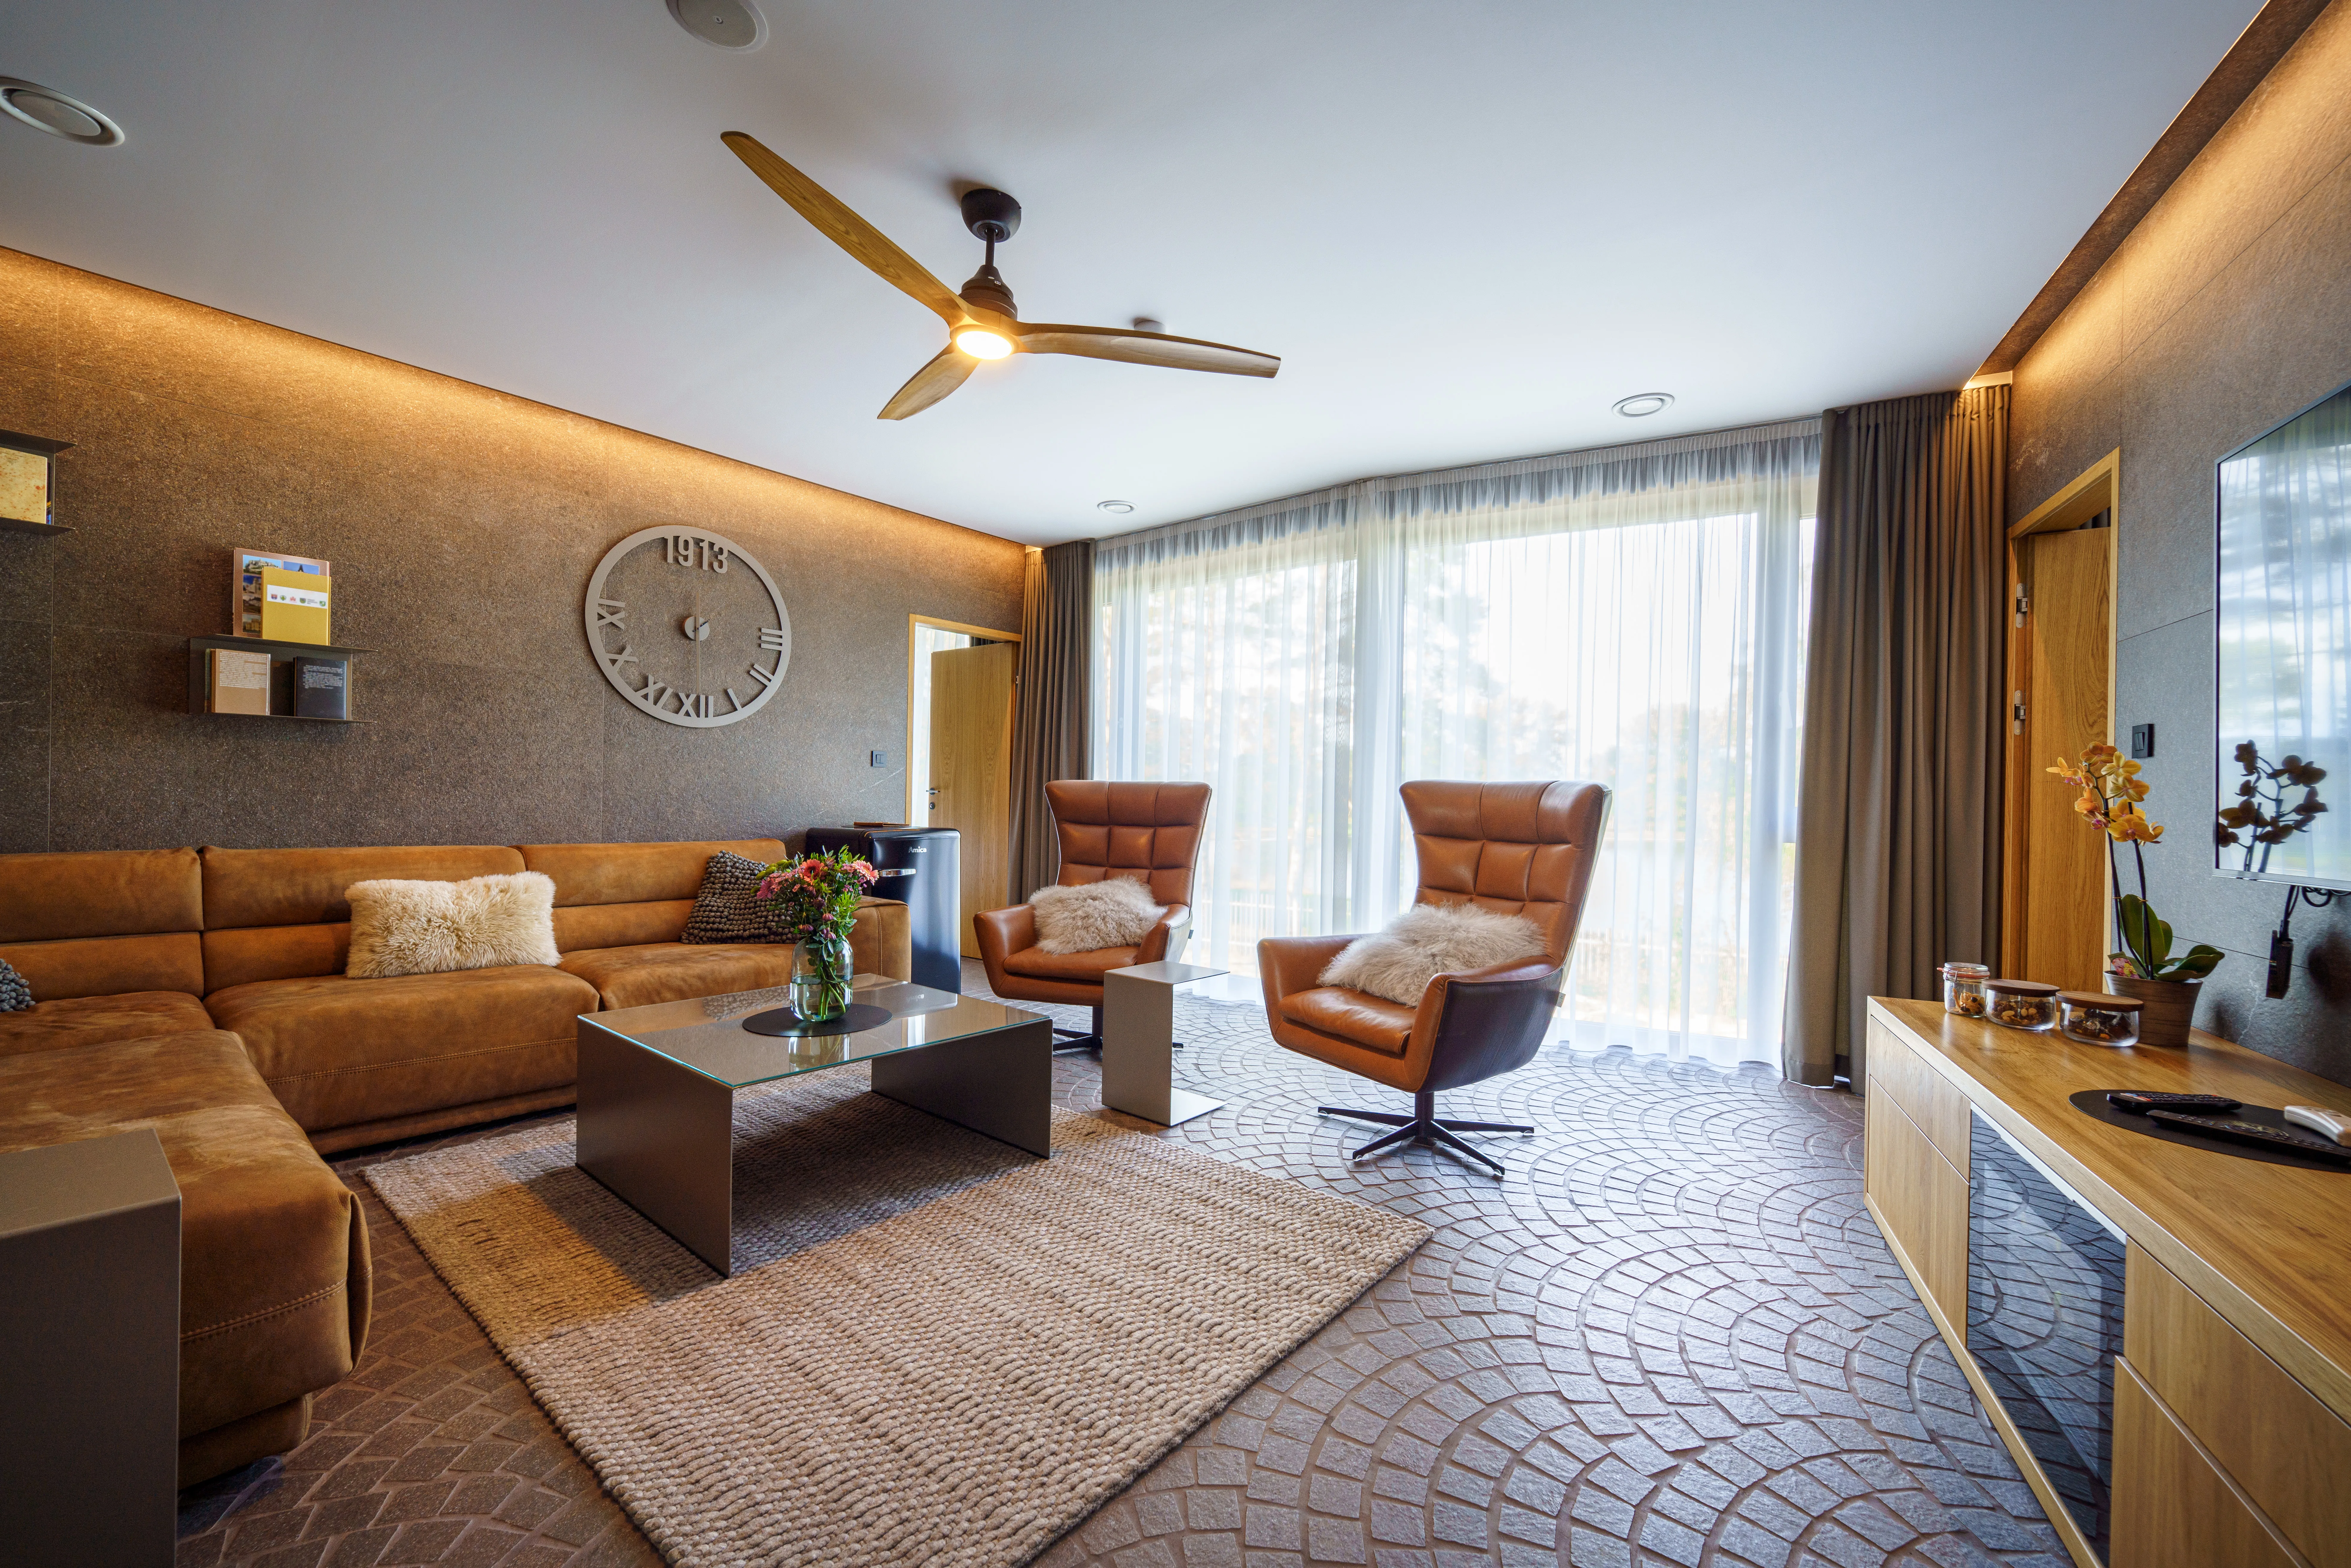 The Value Of Interior Design In The Hospitality Business